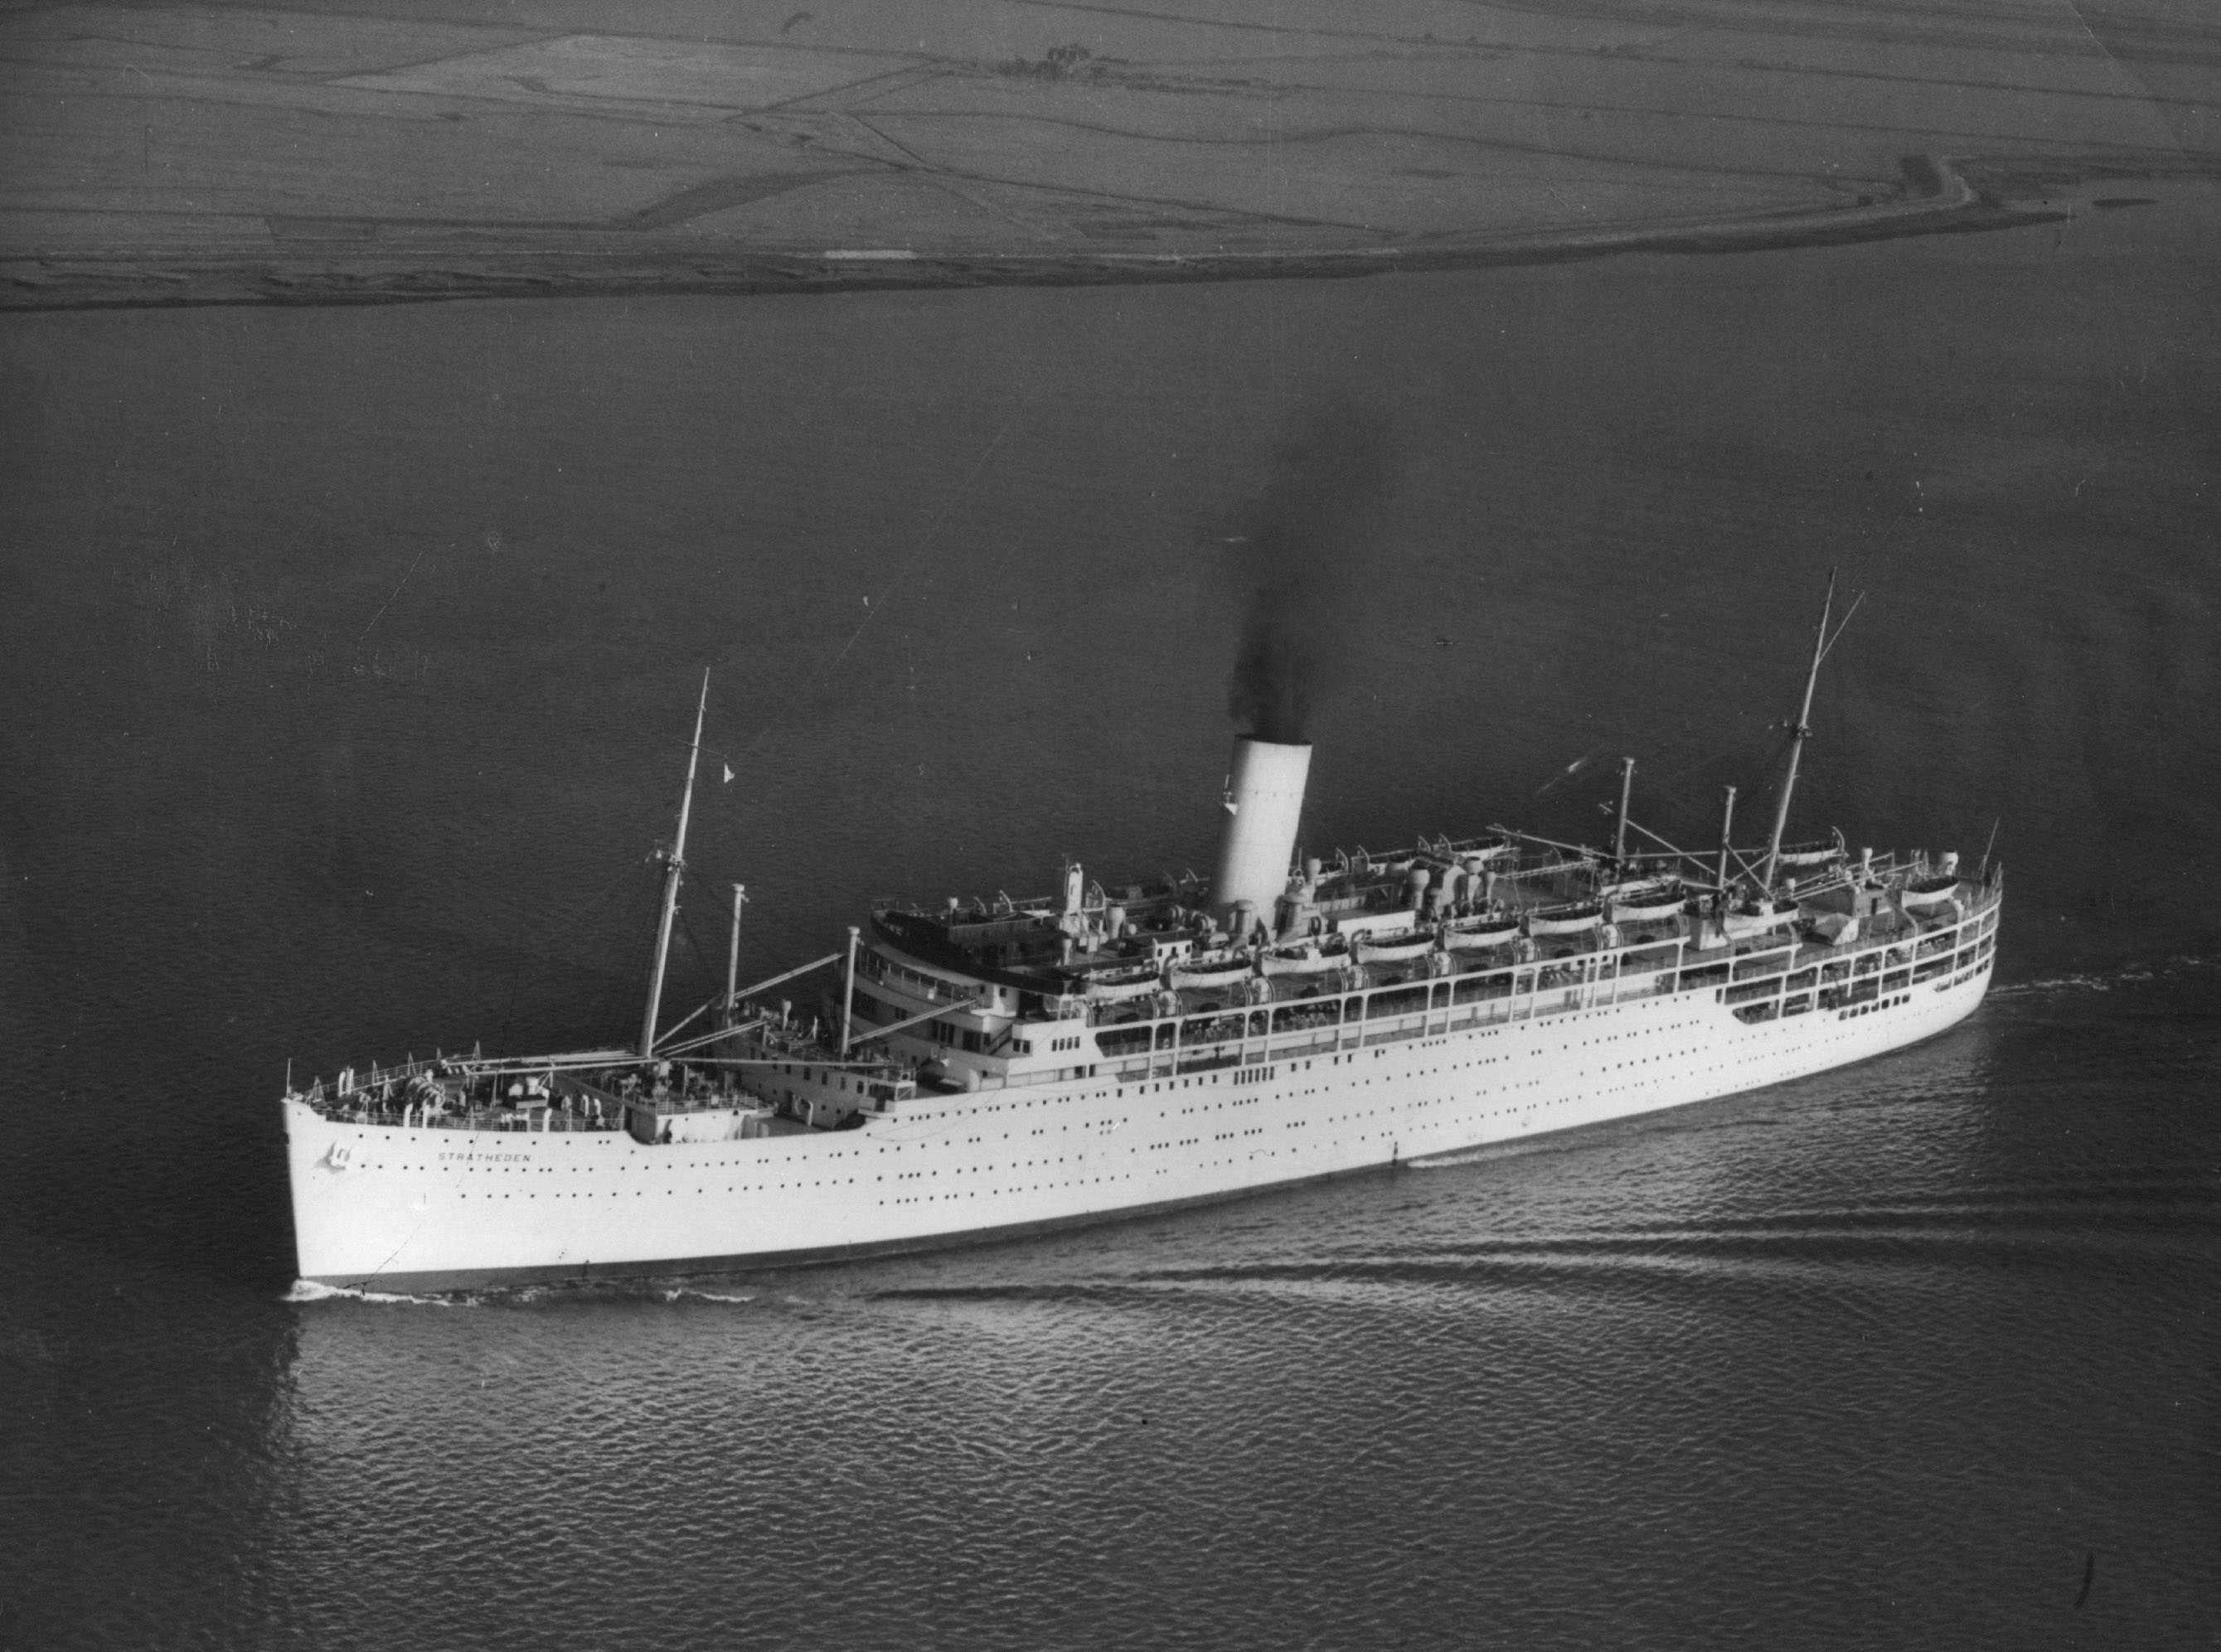 Built by Vickers Armstrong, Barrow -In-Furness, England in 1937.  First owned by P&O untl 1964 when bought by John Latsis.  "Stratheden had her maiden voyage on 24 December 1937 and operated the route between UK and Australia via the Suez Canal.  In 1939 